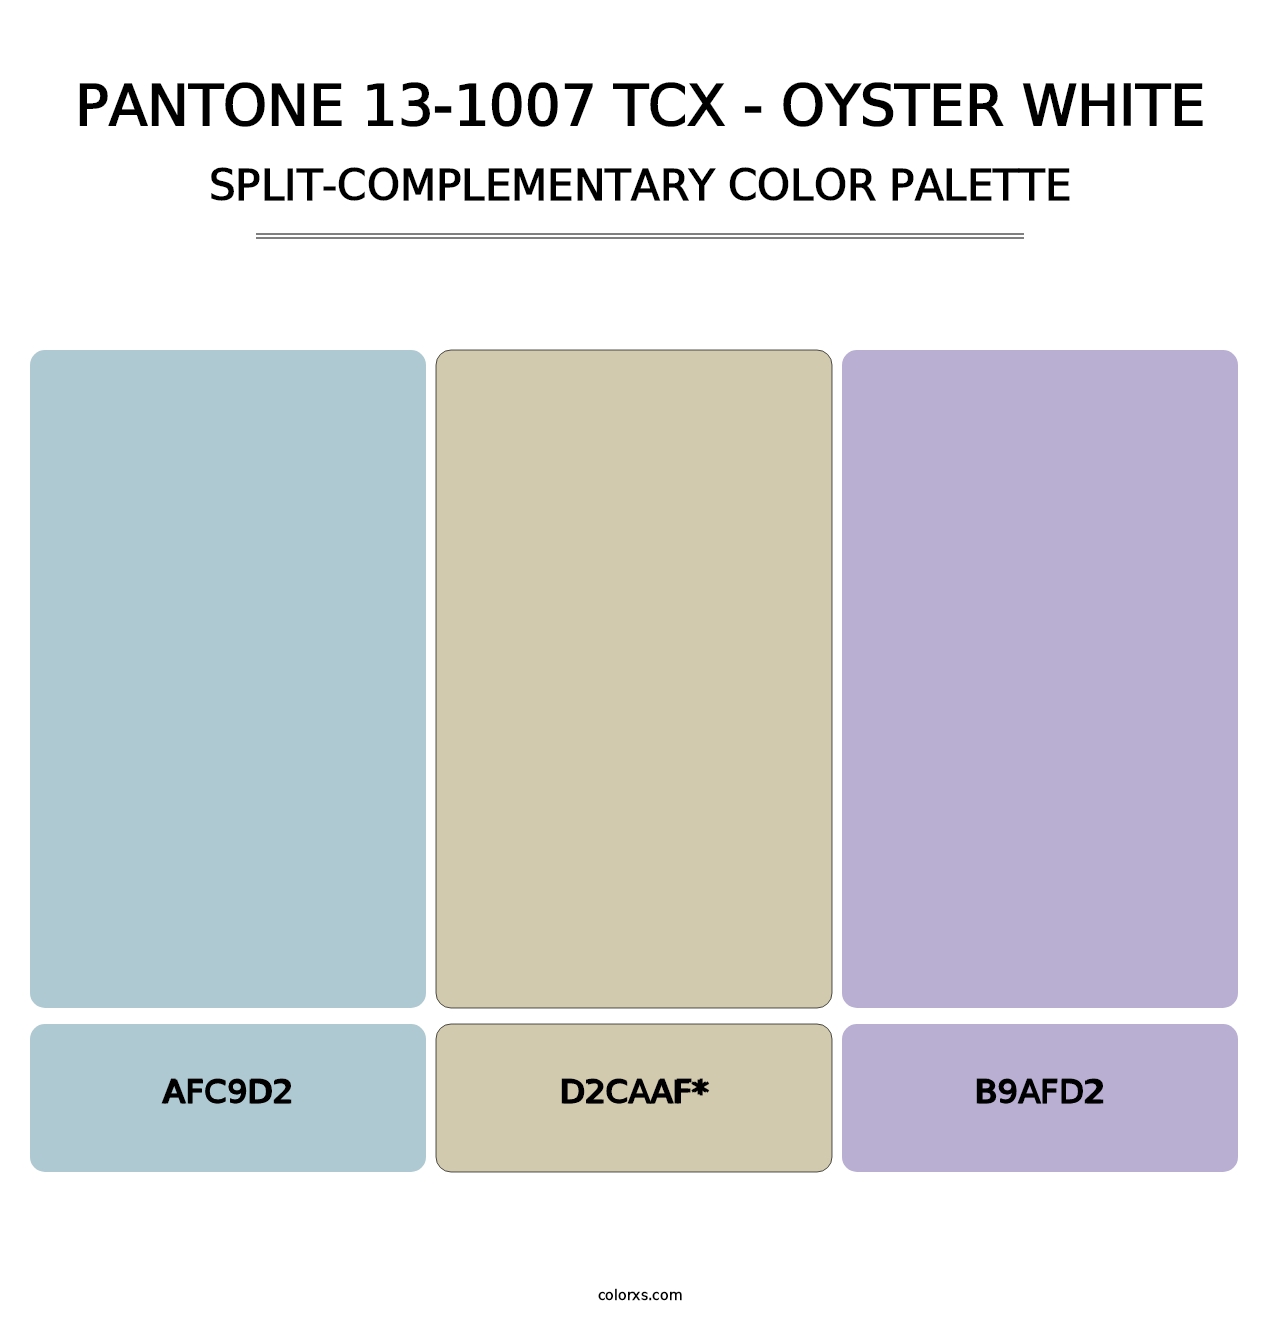 PANTONE 13-1007 TCX - Oyster White - Split-Complementary Color Palette